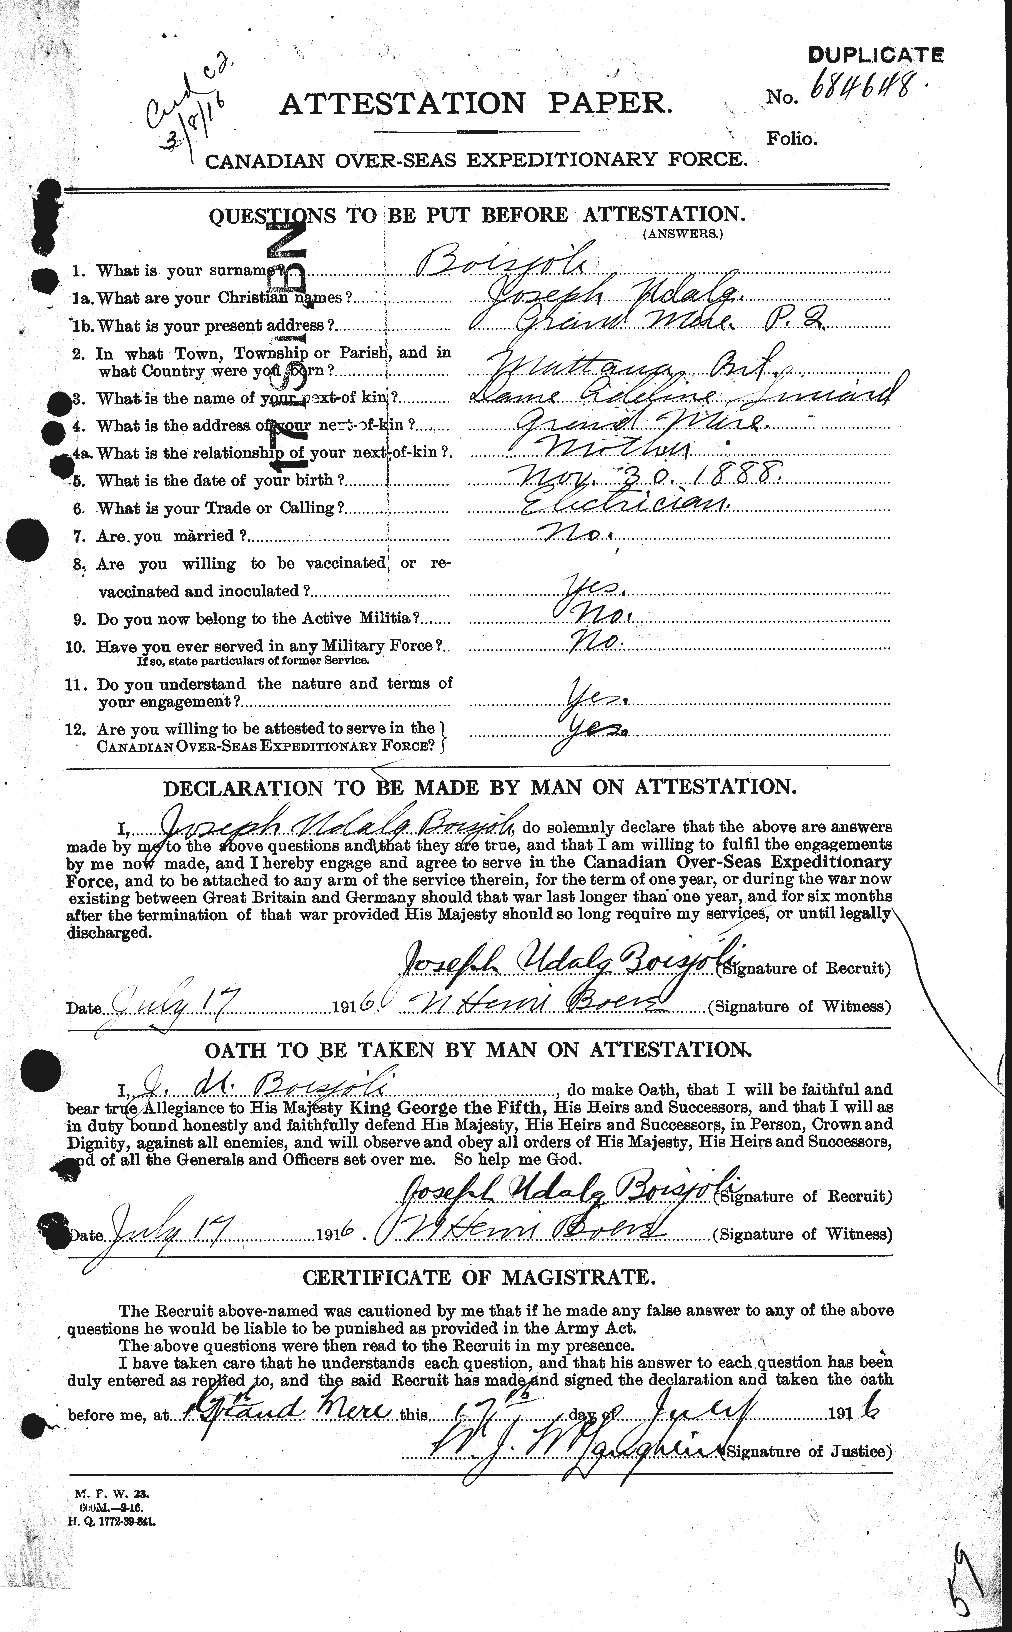 Personnel Records of the First World War - CEF 249408a